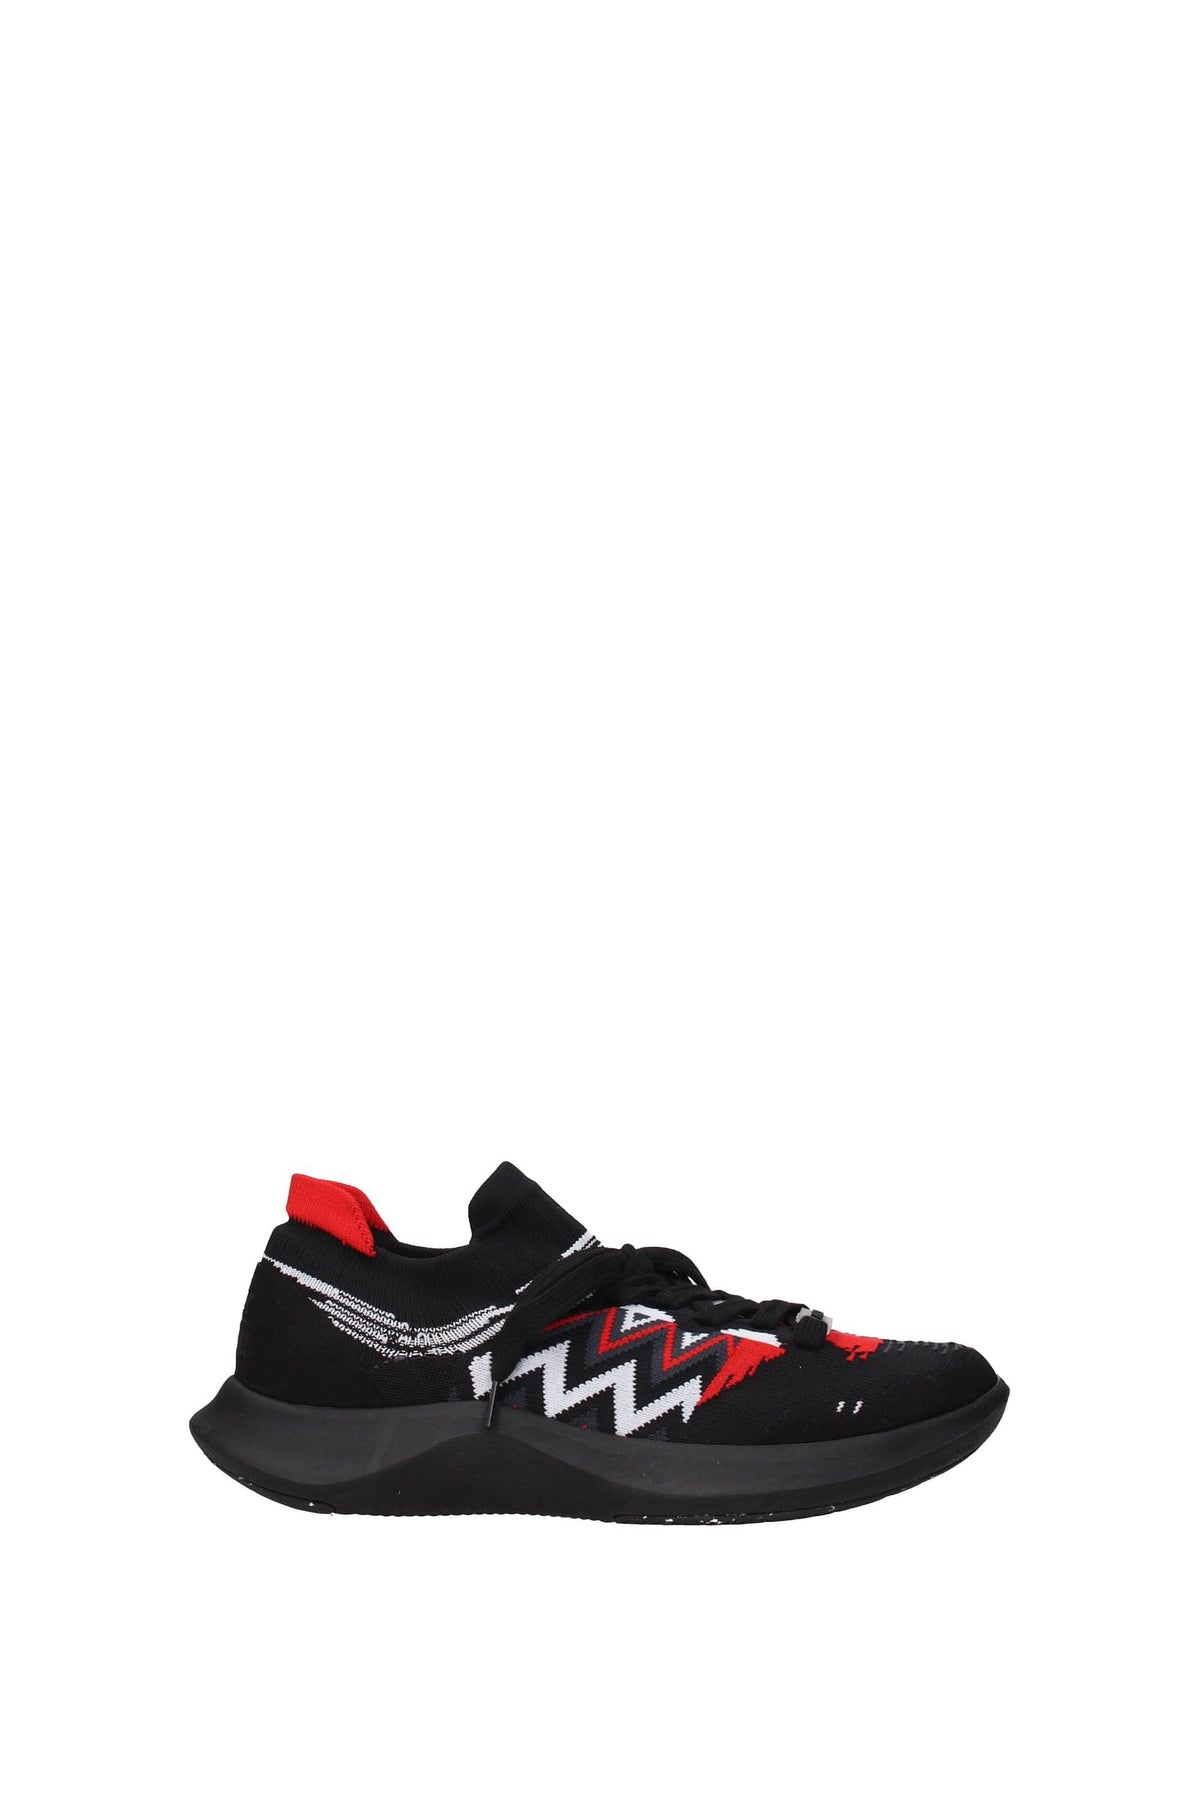 MISSONI SNEAKERS ACBC FABRIC BLACK RED